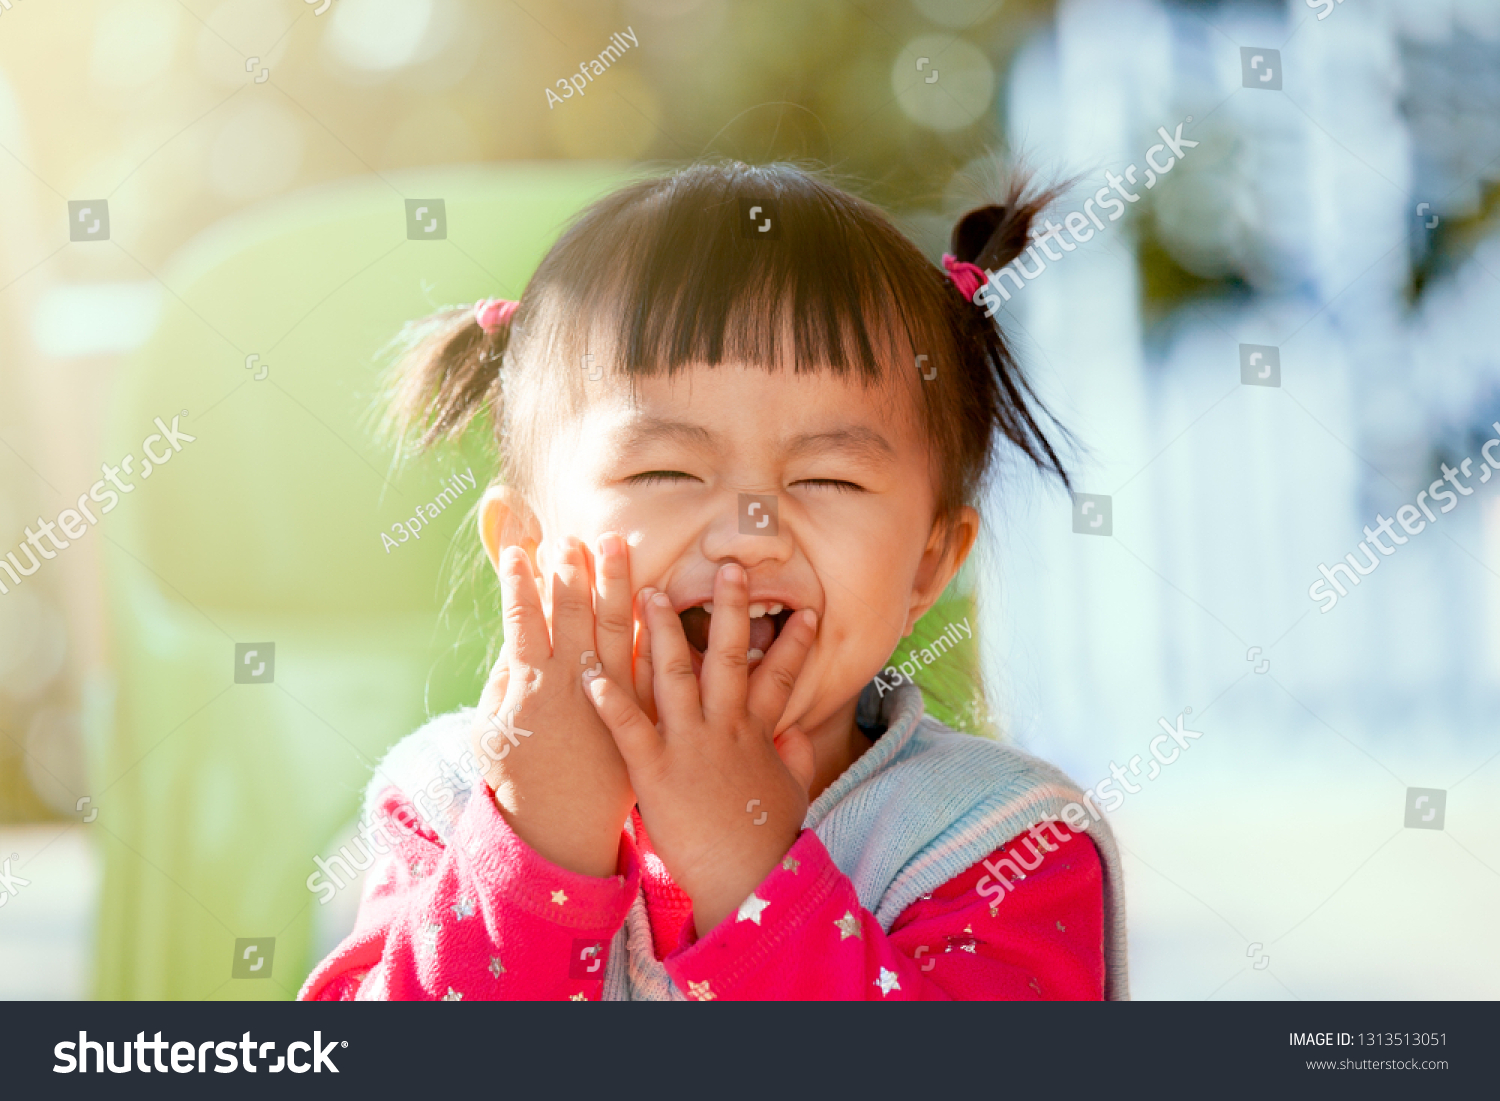 Cute asian baby girl laughing and playing peekaboo or hide and seek with fun #1313513051